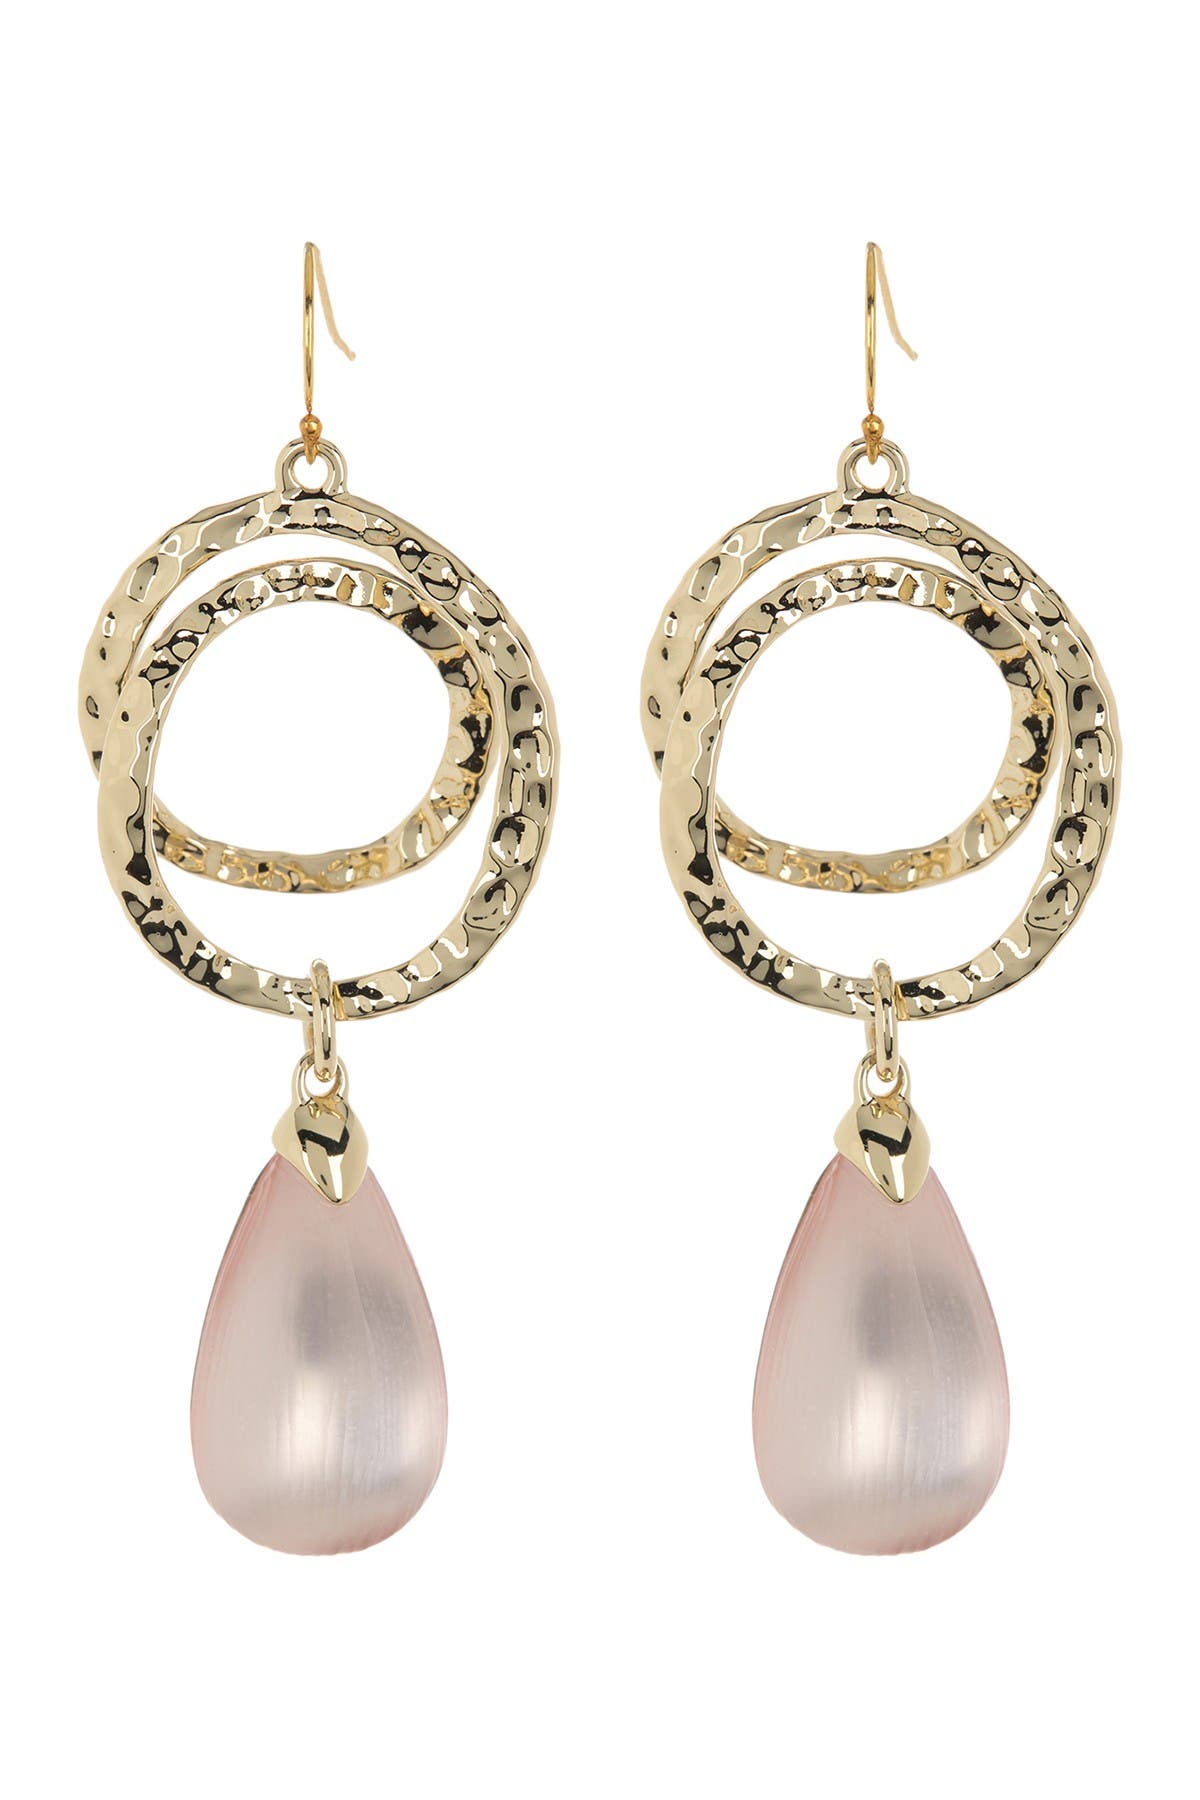 Alexis Bittar Hammered Coil Link Tear Drop Earrings In Sunset